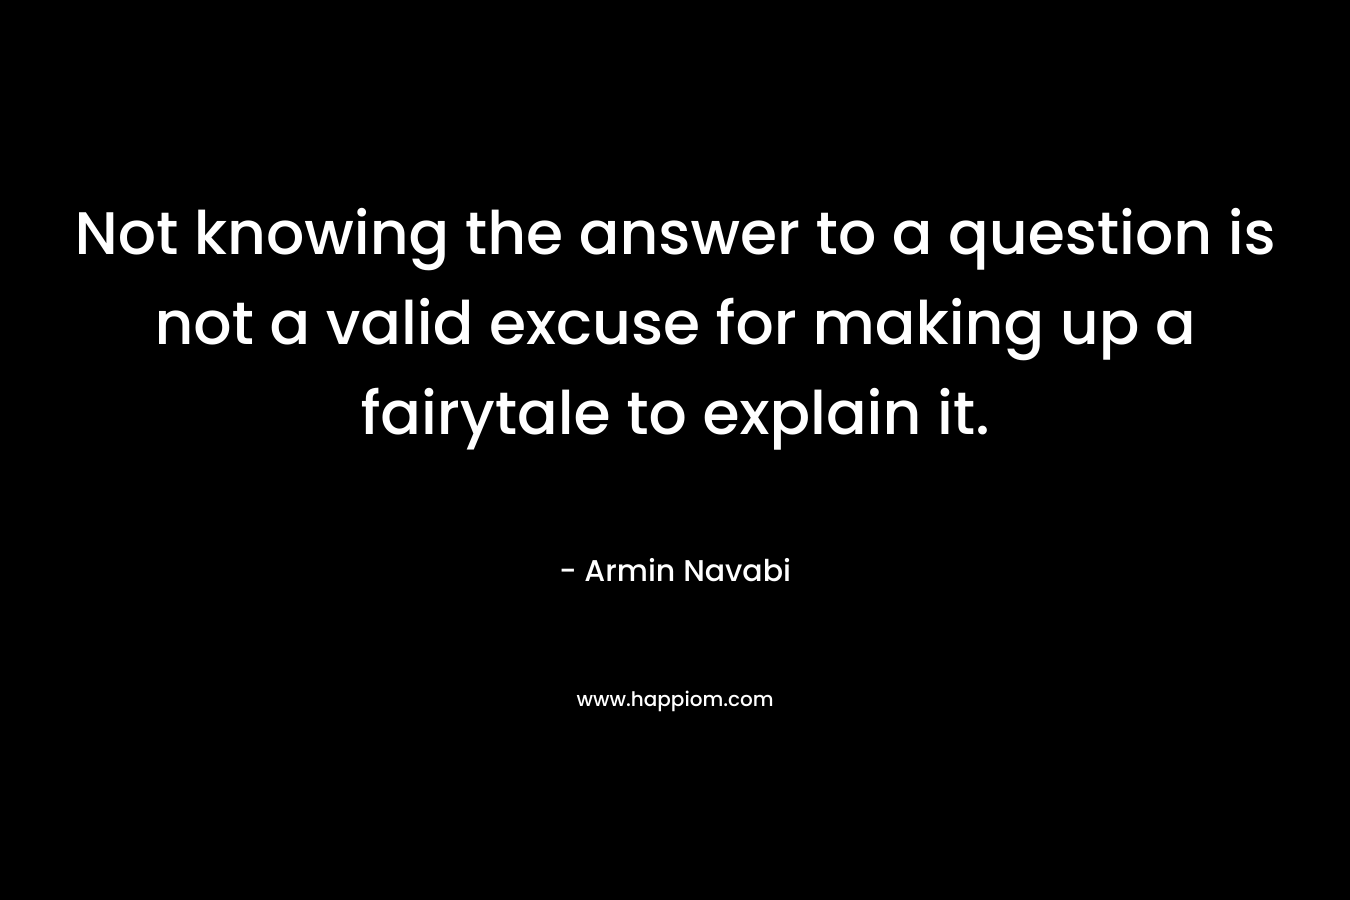 Not knowing the answer to a question is not a valid excuse for making up a fairytale to explain it. – Armin Navabi